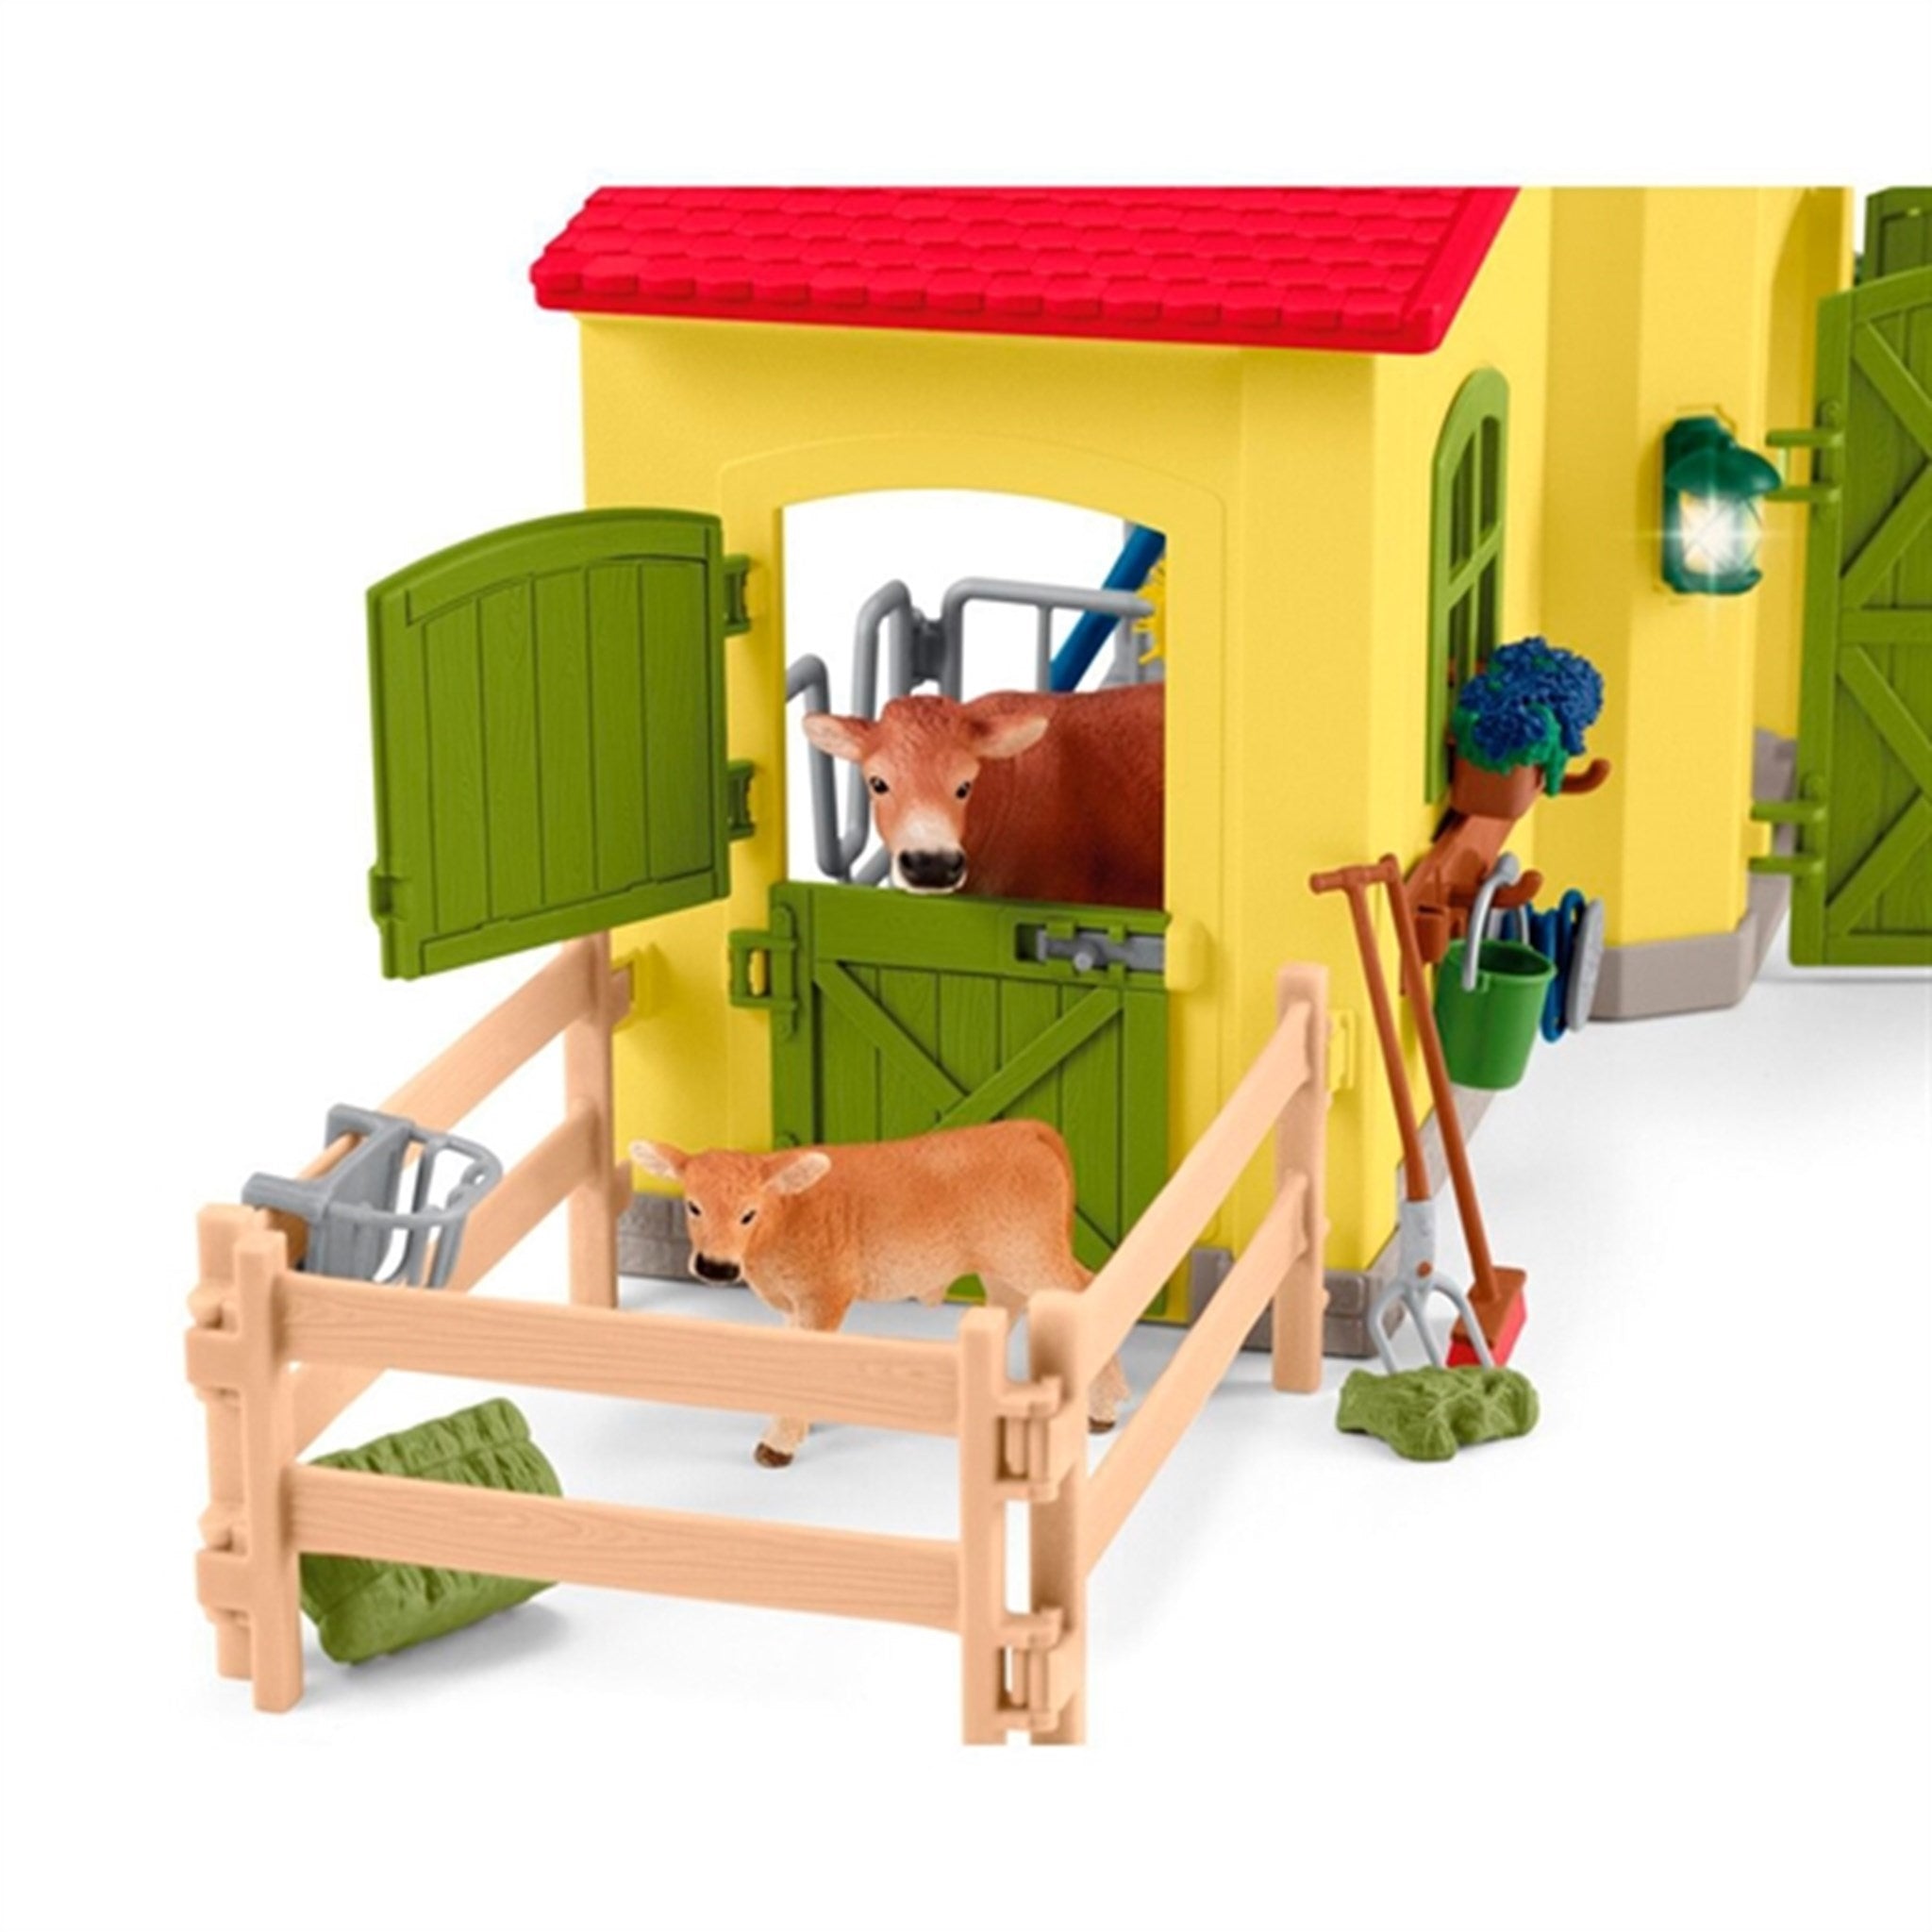 Schleich Farm World Large Farm with Animals and Accessories 3